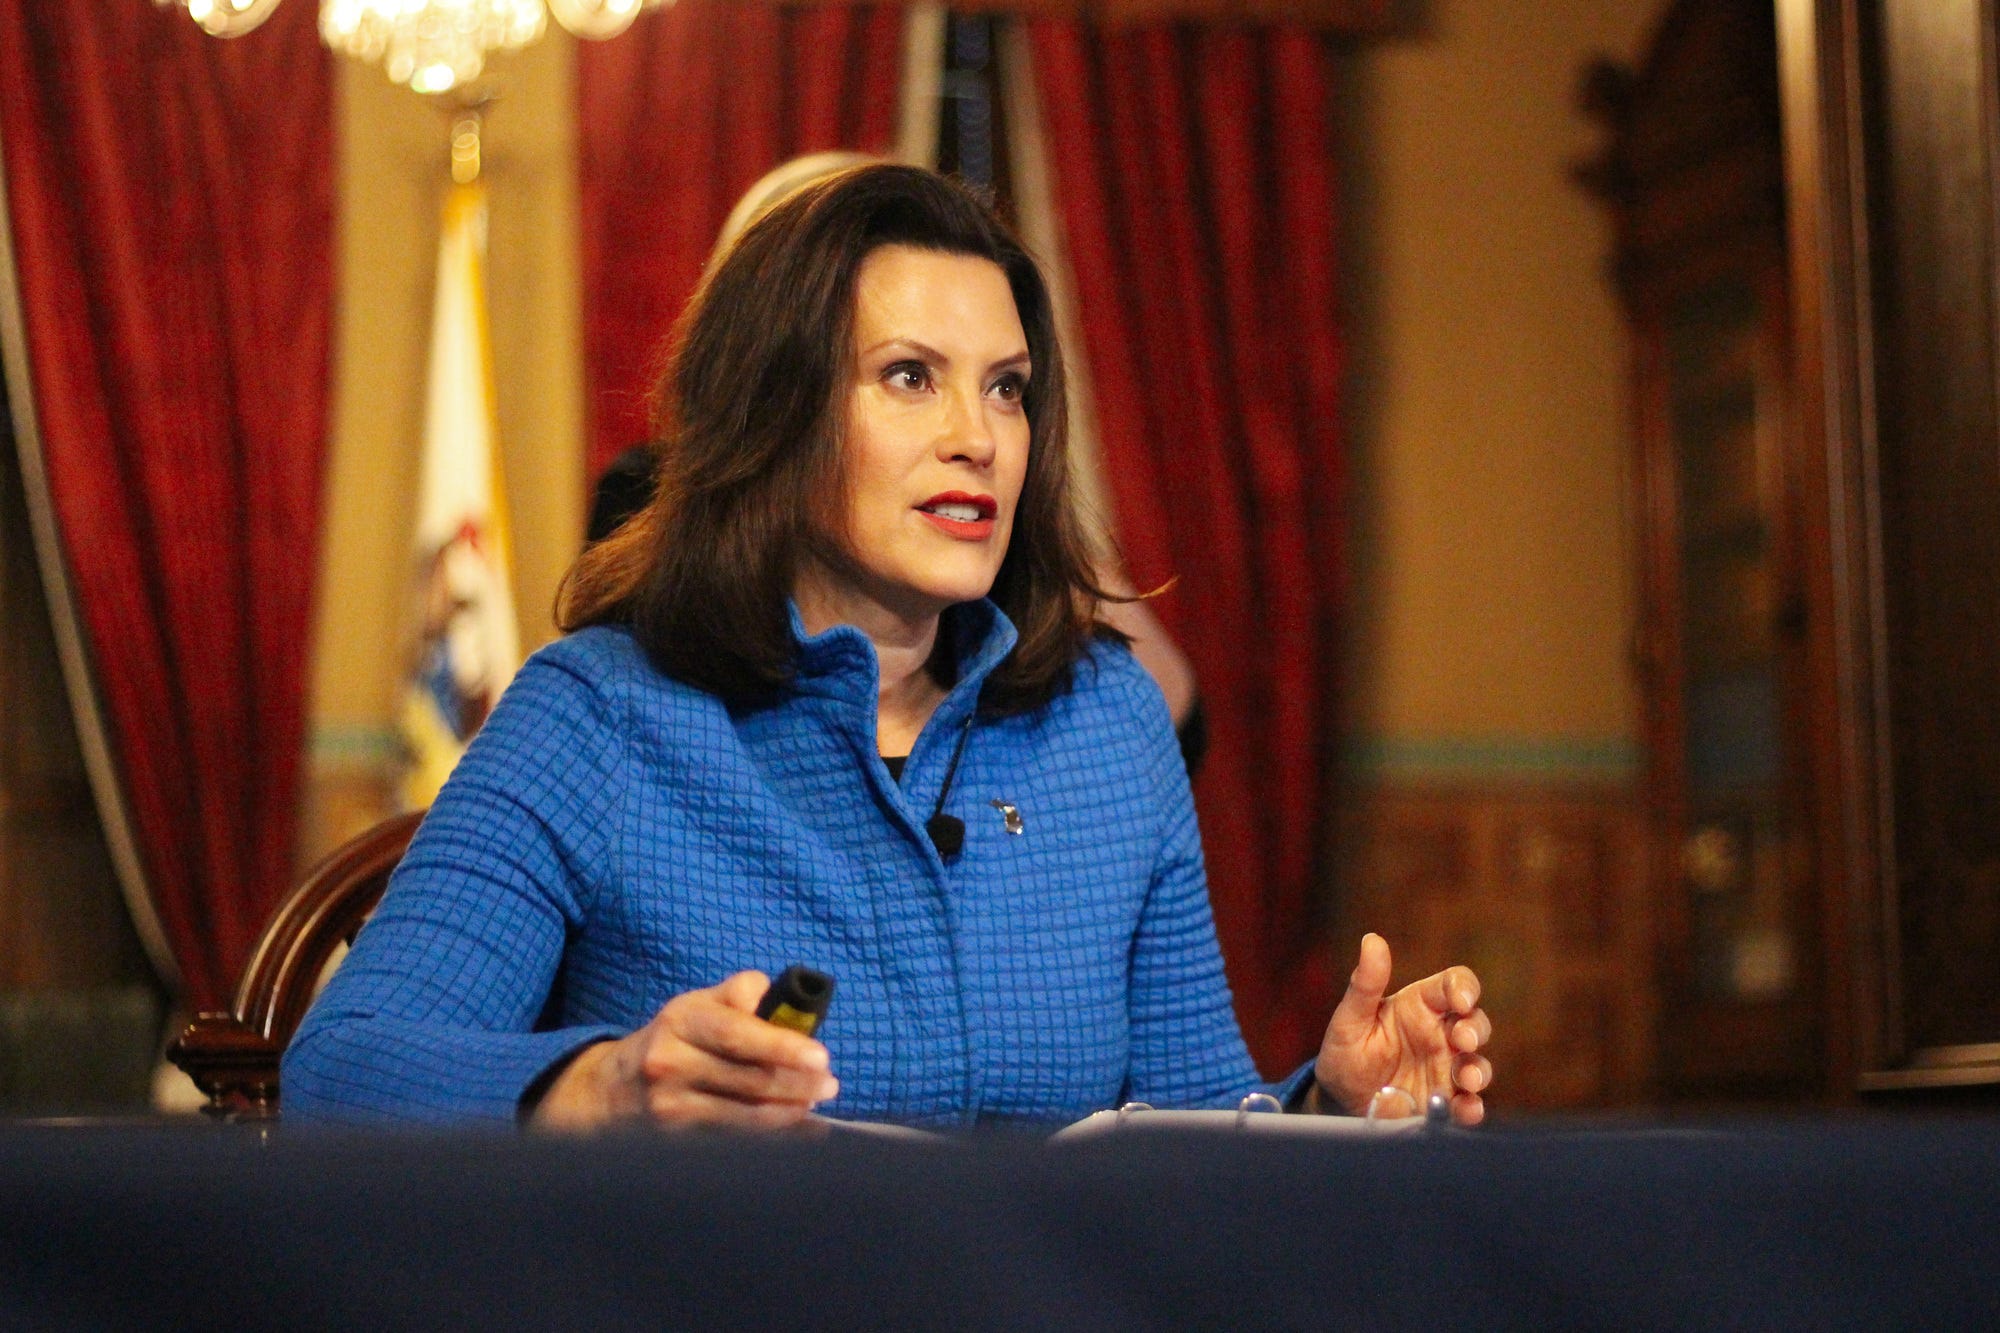 Gov. Gretchen Whitmer is seen here giving an update on the COVID-19 pandemic during a March 2020 press conference inside her Capitol office. The governor's order that COVID patients remain inside long-term care facilities drew criticism during the early days of the pandemic.